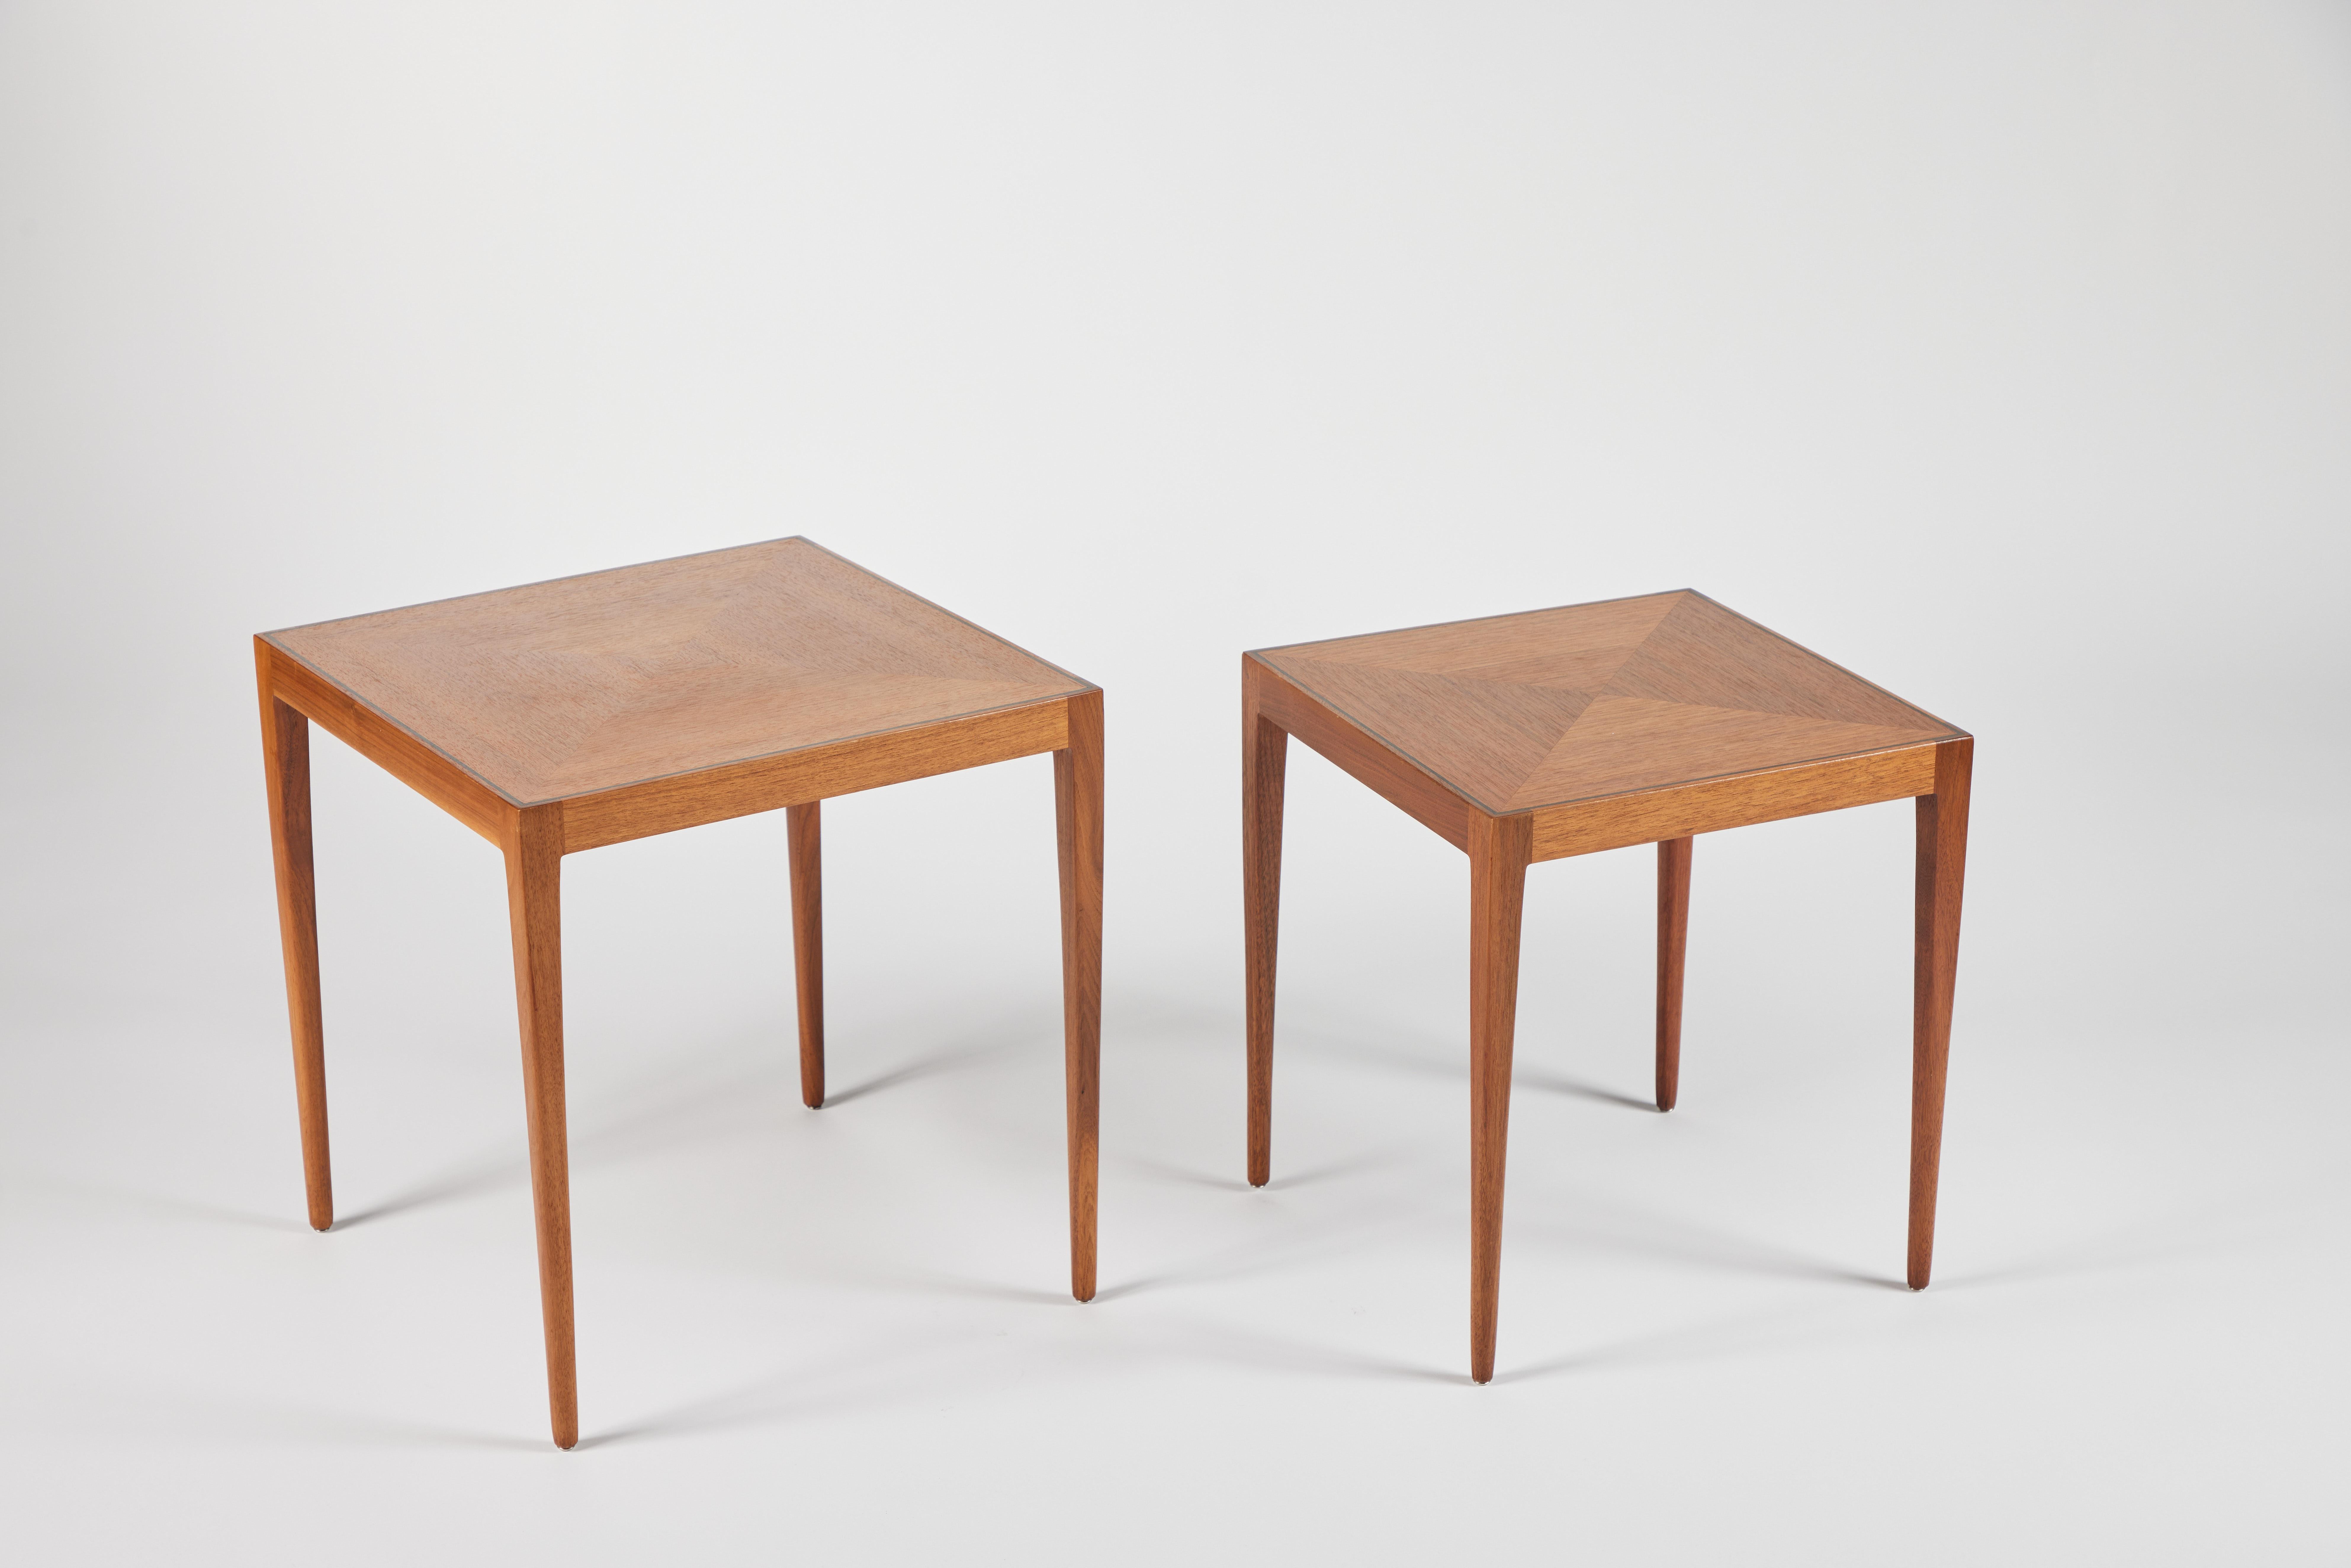 Midcentury Paul McCobb for Calvin inlaid walnut wood end/side tables with tapered legs, a set of 2 - large & small. 1960s. 

Measures: Large table: 18